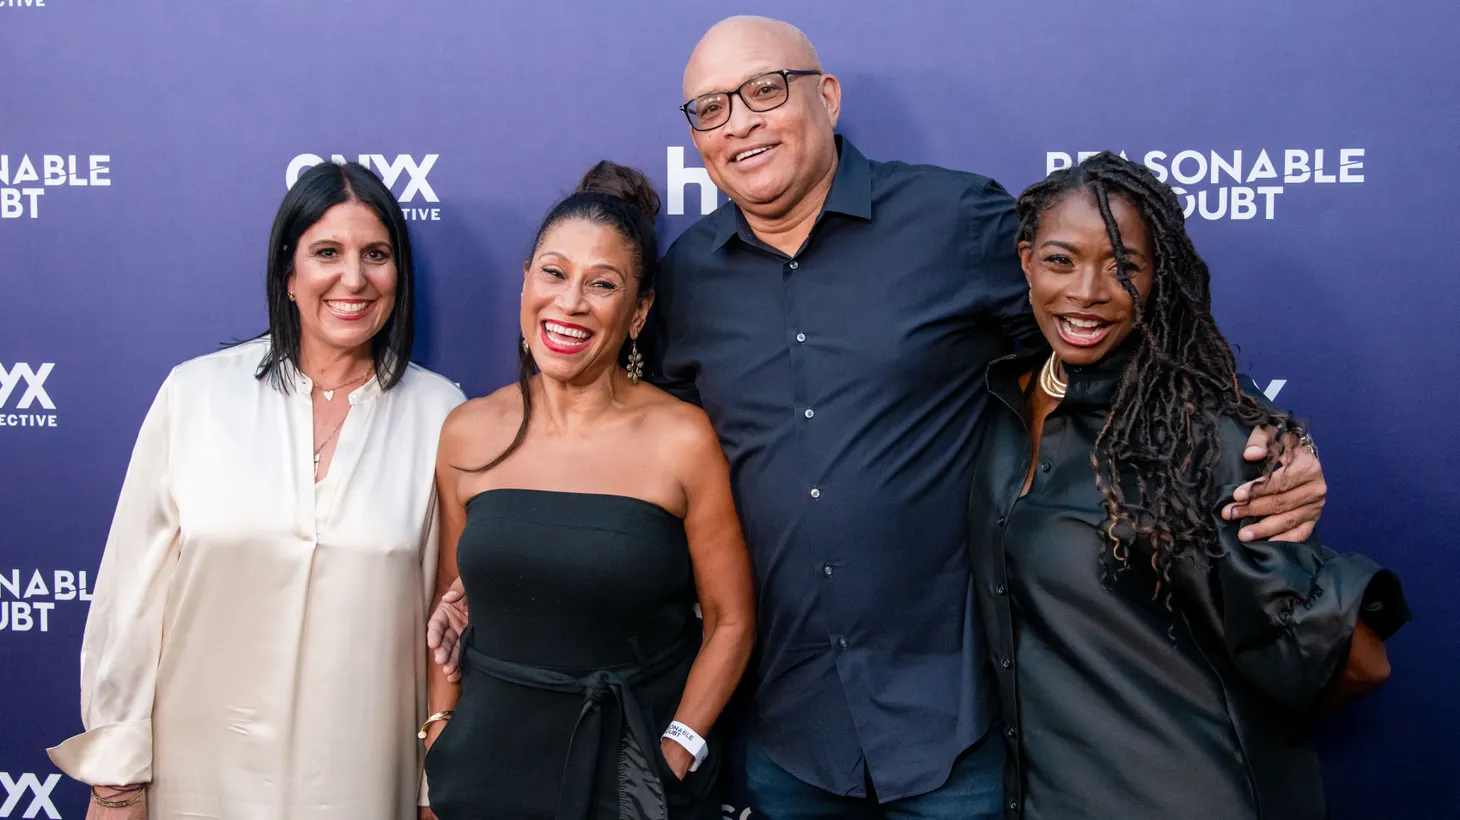 (L-R) Pilar Savone, Shawn Holley, Raamla Mohamed and Larry Wilmore attend the premiere Of Hulu's "Reasonable Doubt" in Los Angeles, on September 22, 2022.